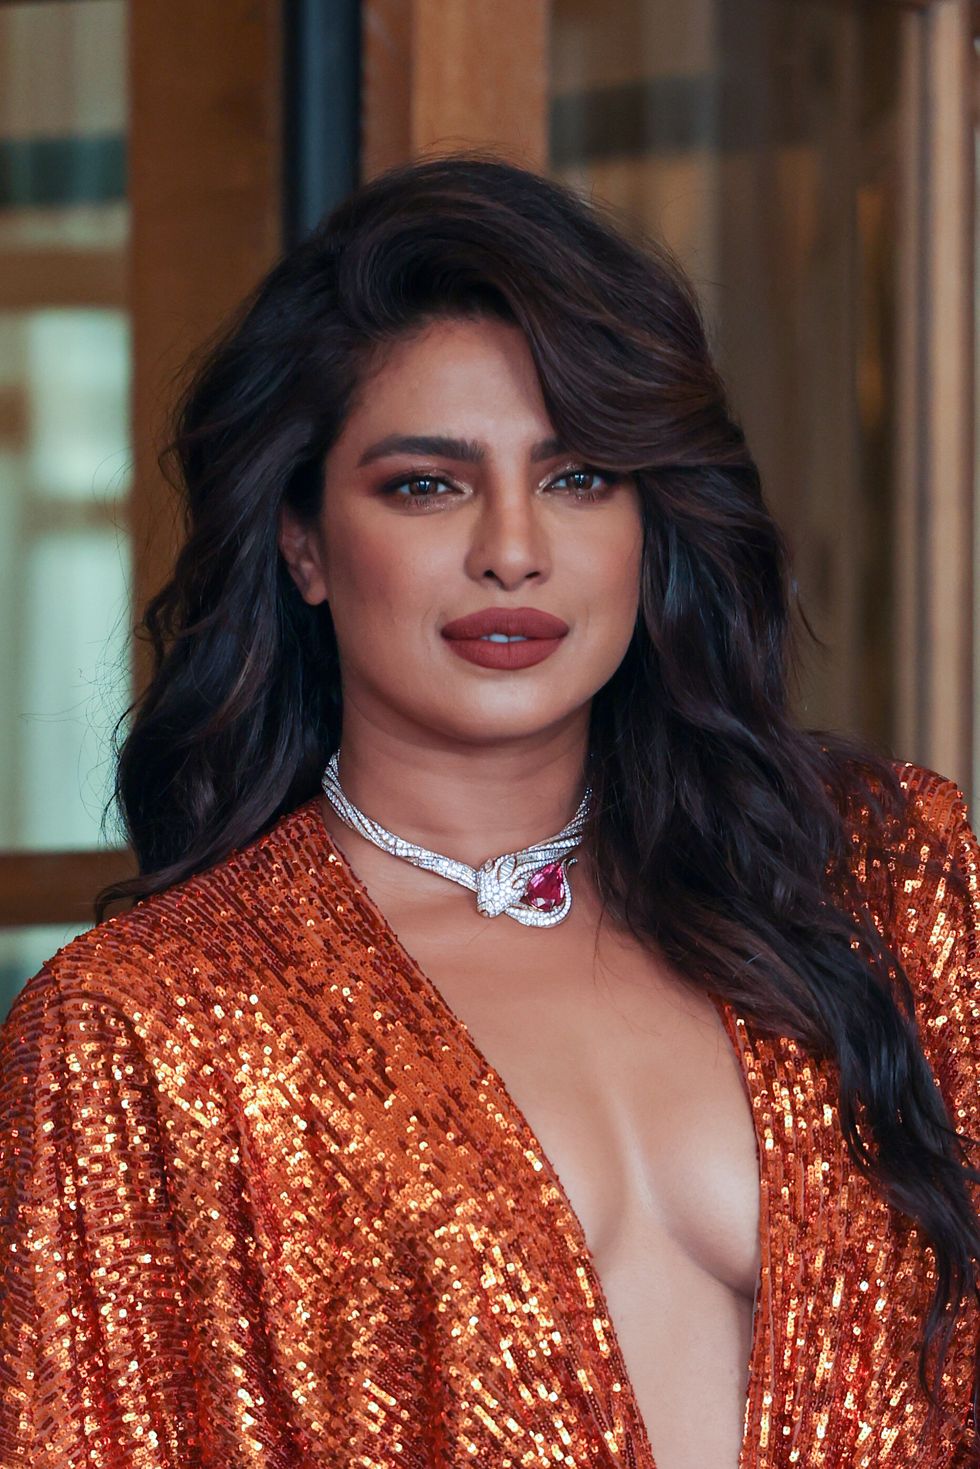 paris, france   june 06  actress priyanka chopra is seen outside the ritz hotel on june 06, 2022 in paris, france photo by pierre suugc images